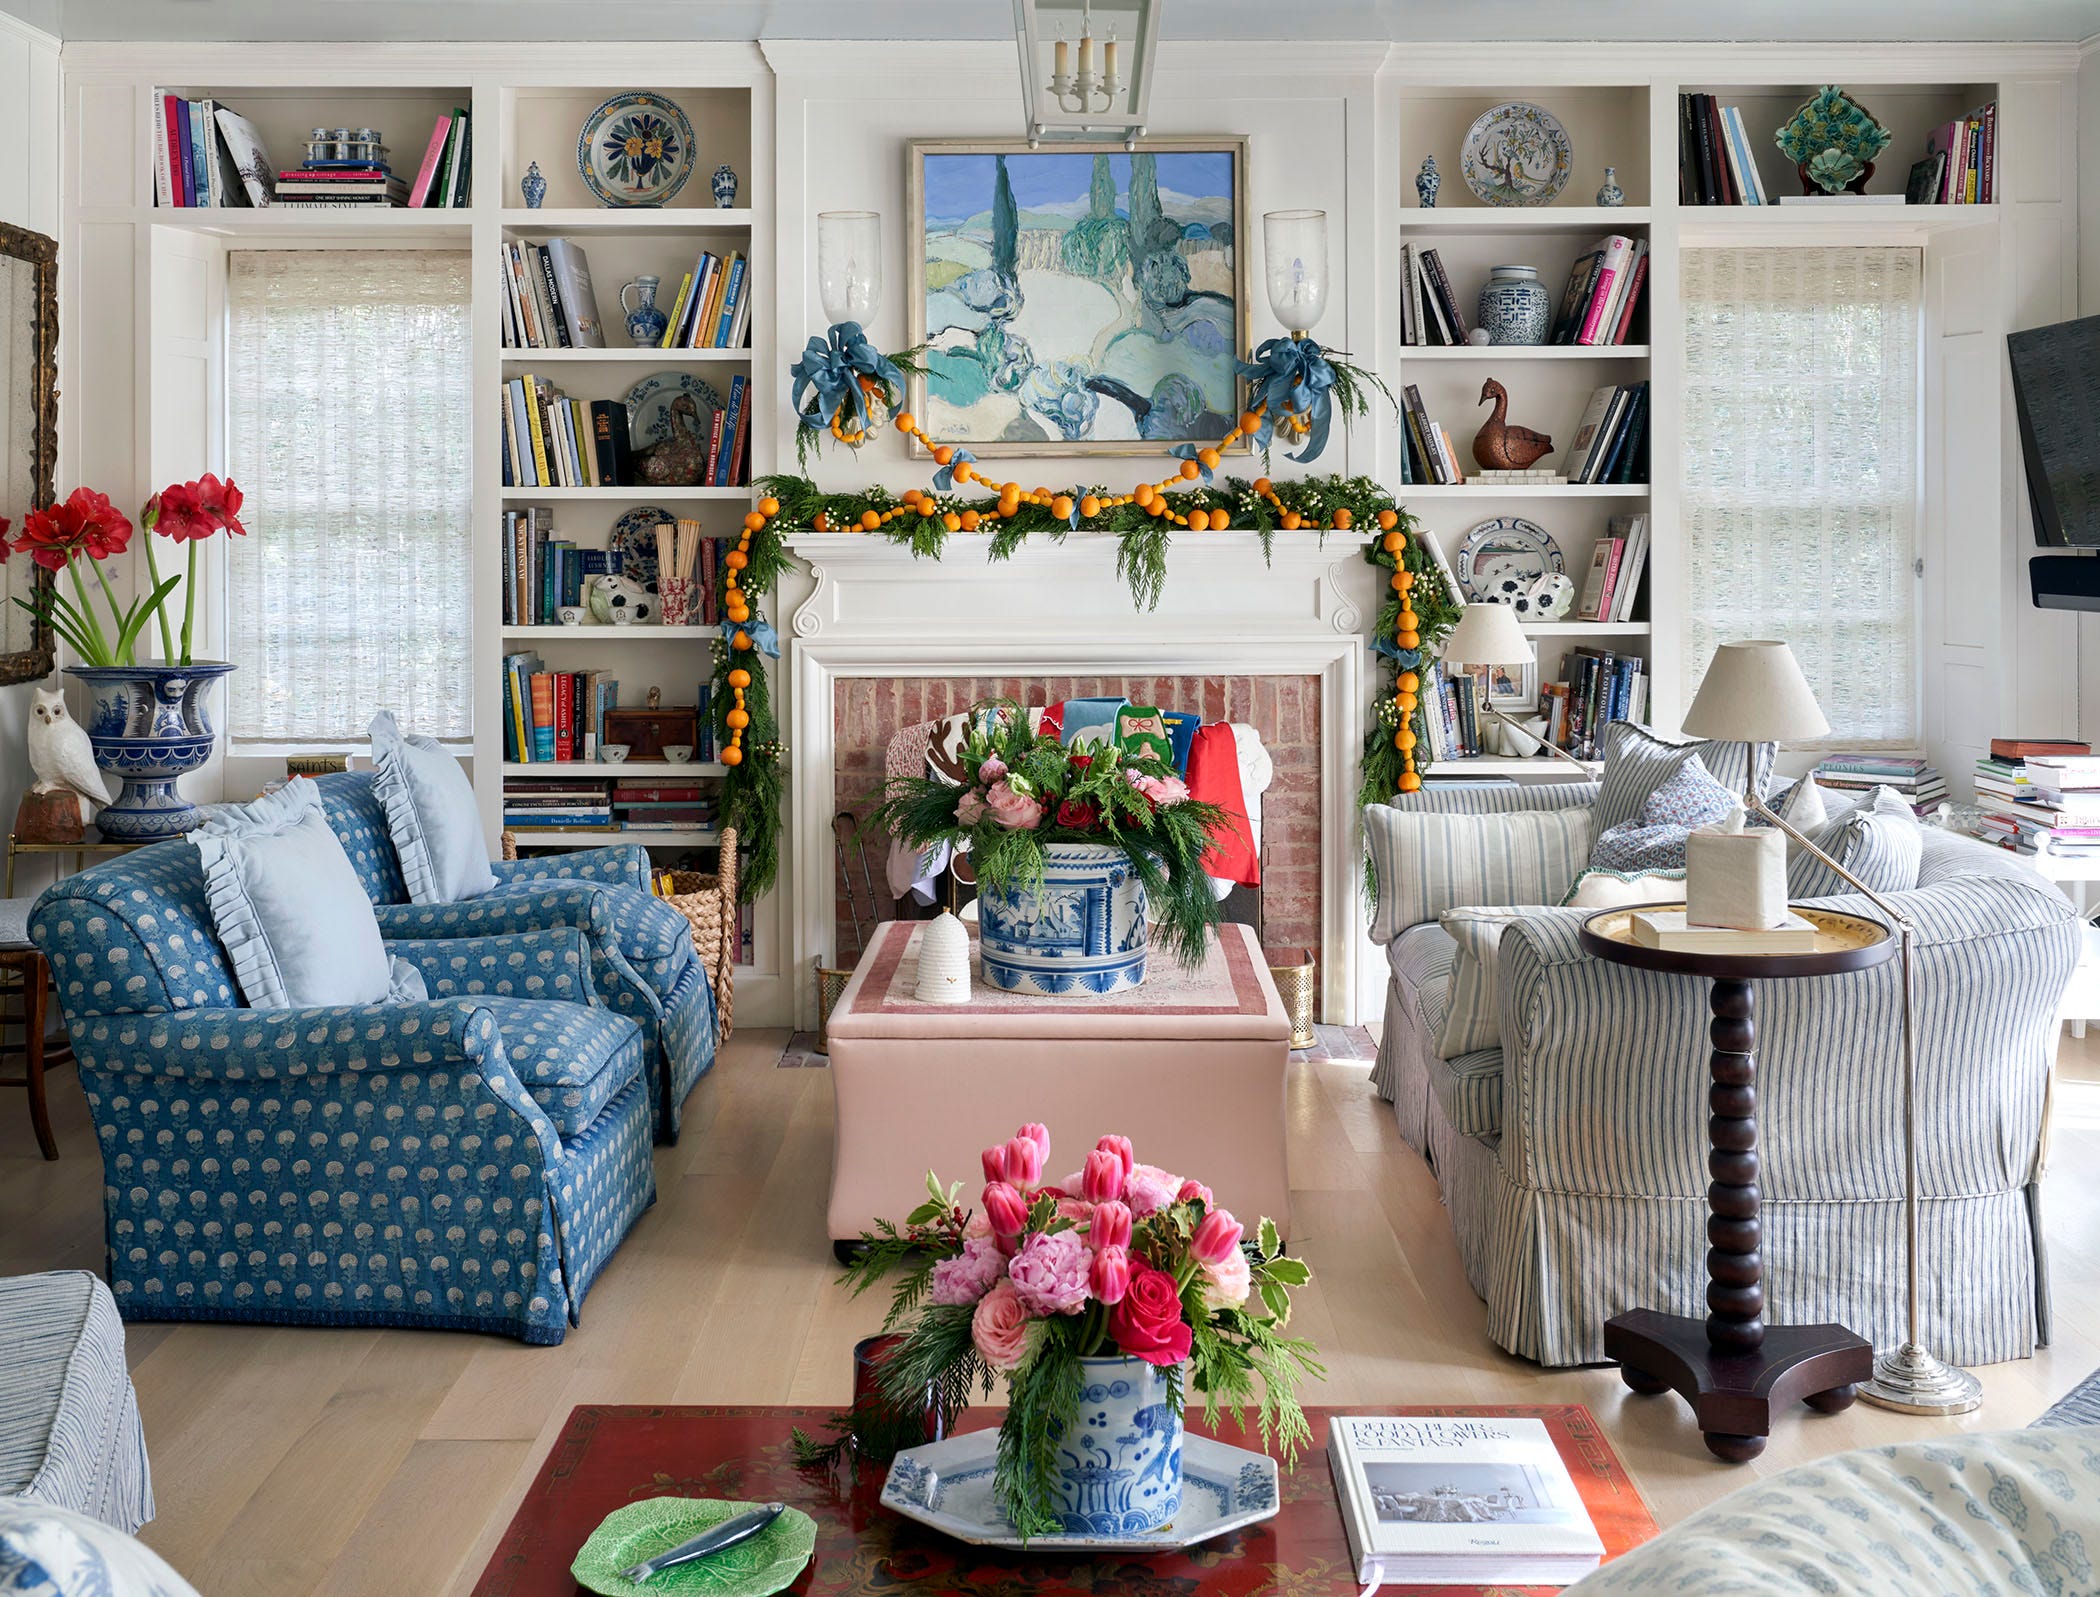 Cathy Kincaid's Dallas Home Is a Masterclass in Haute Holiday Decorating